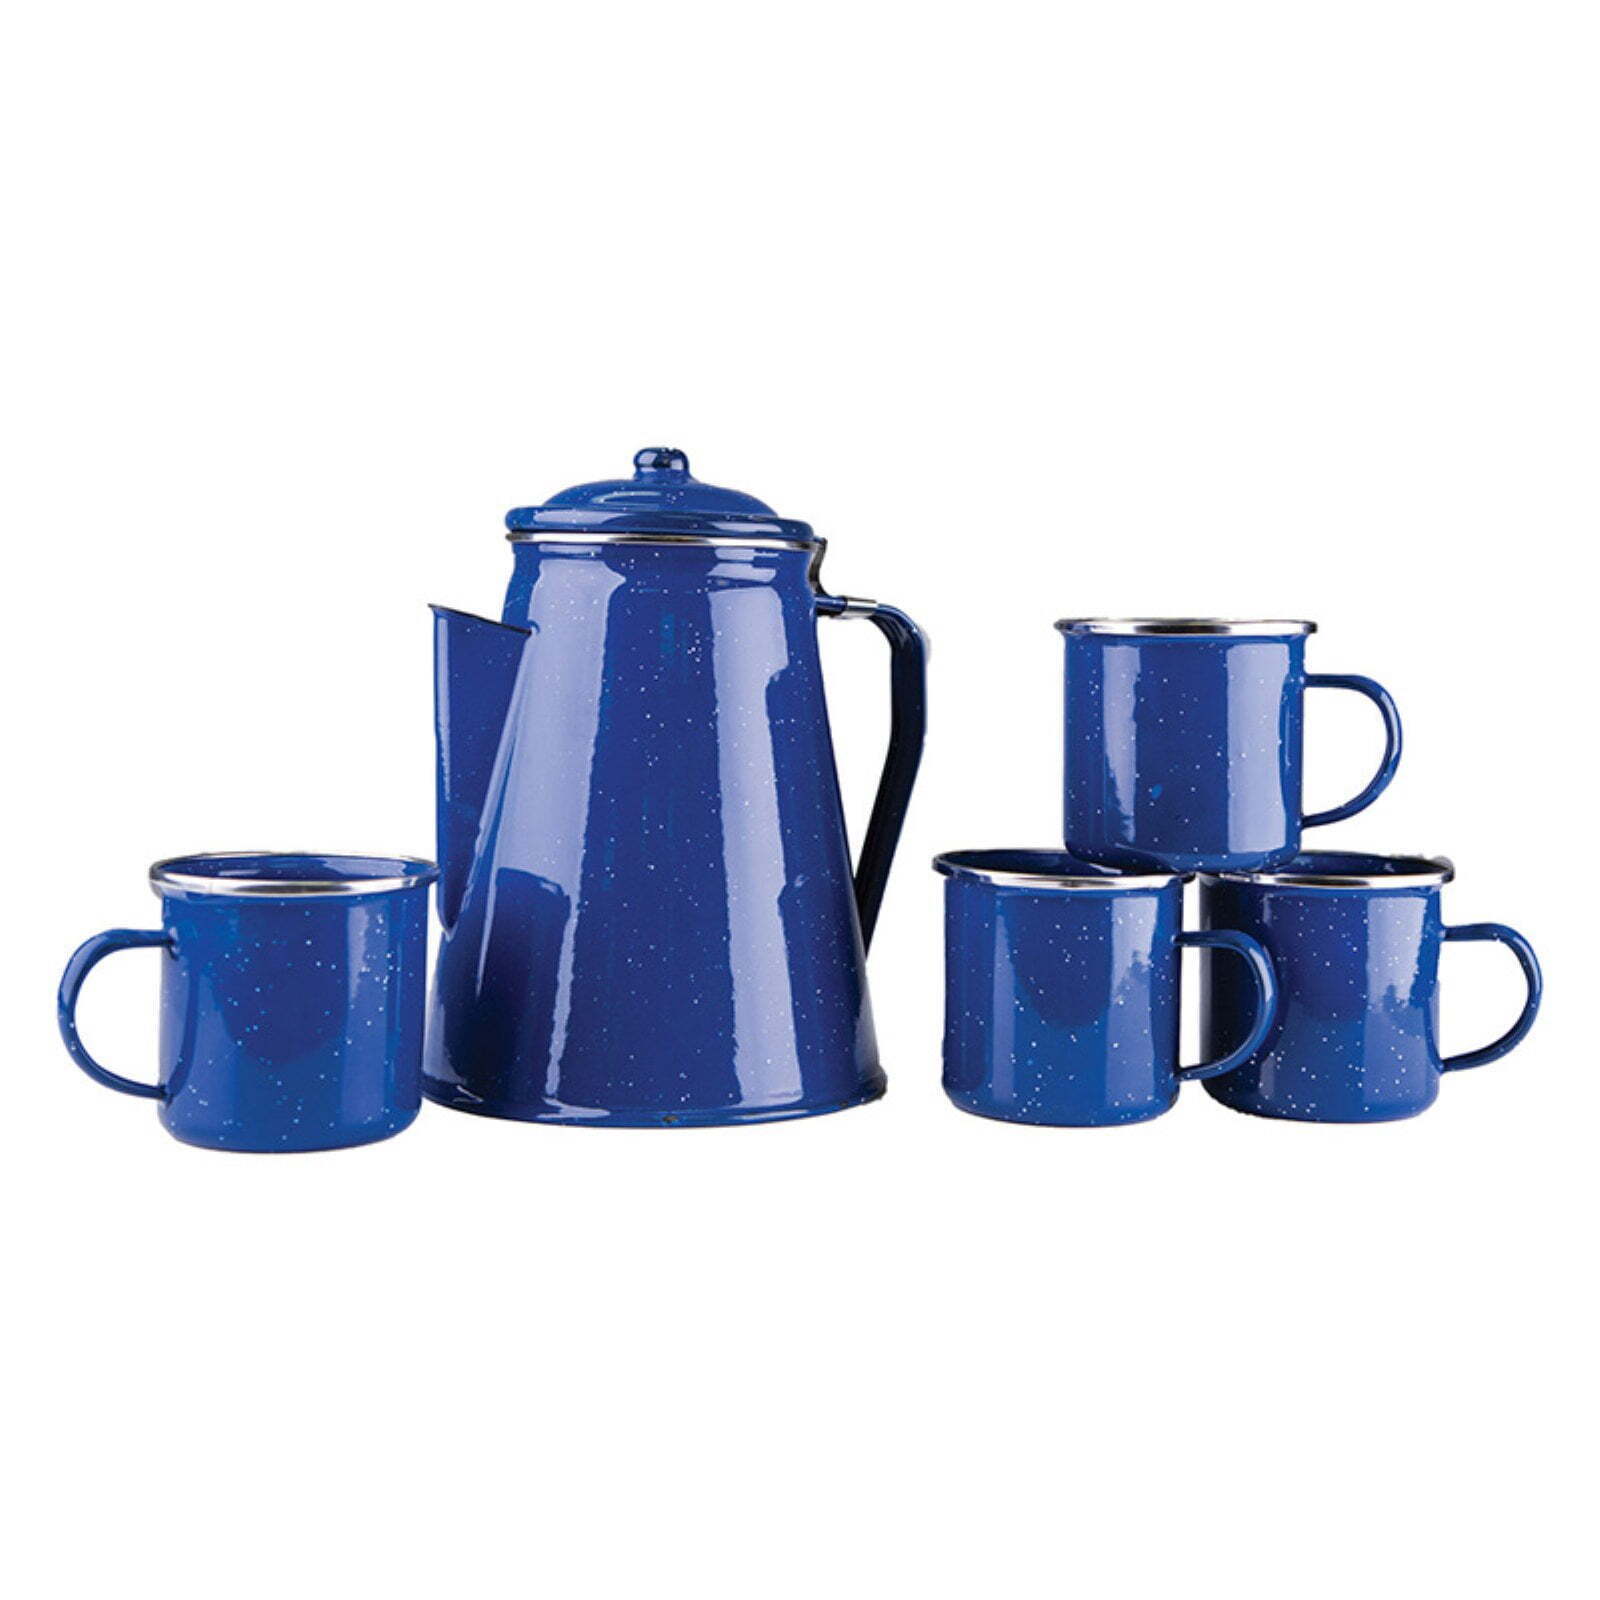 Enamel 8 Cup Coffee Pot with Percolator And 4 12 Ounce Mugs Blue (11230)